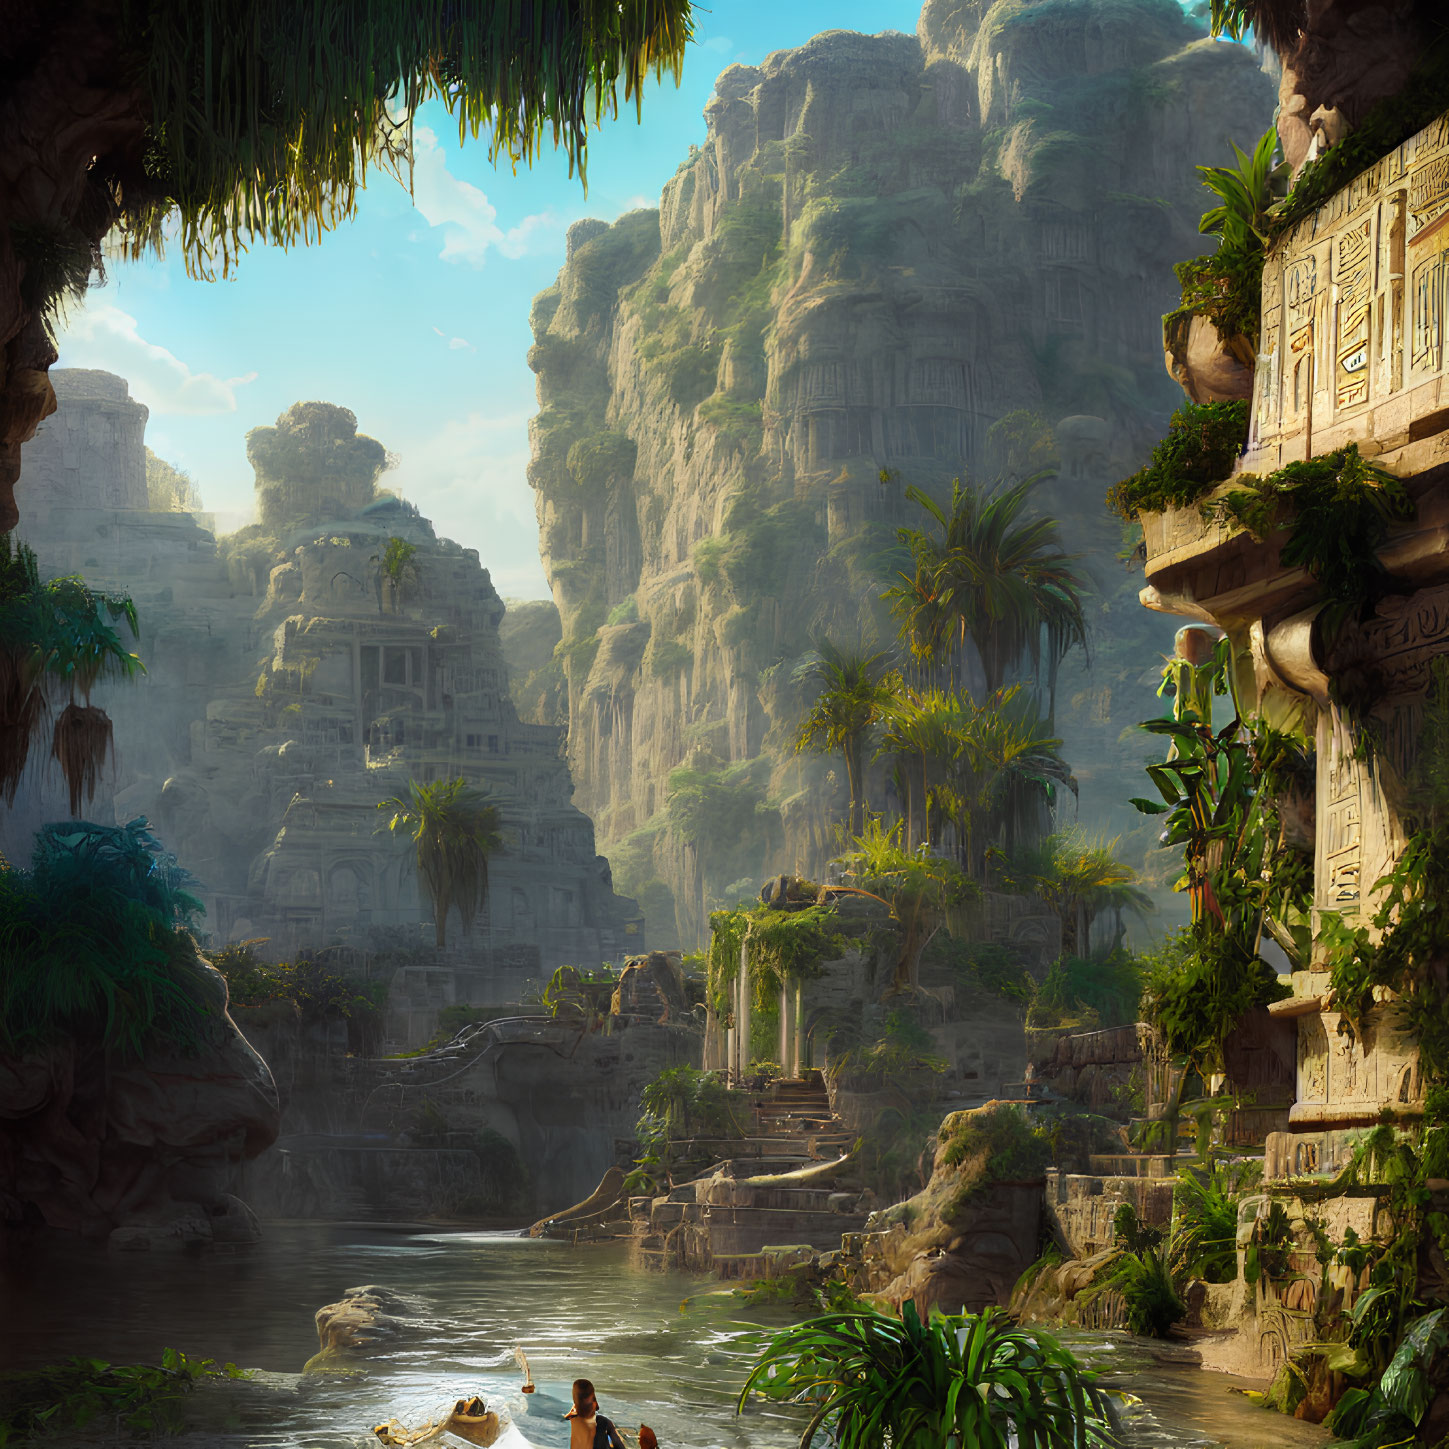 Jungle landscape with cliffs, ruins, river, canoe, and sunlit sky